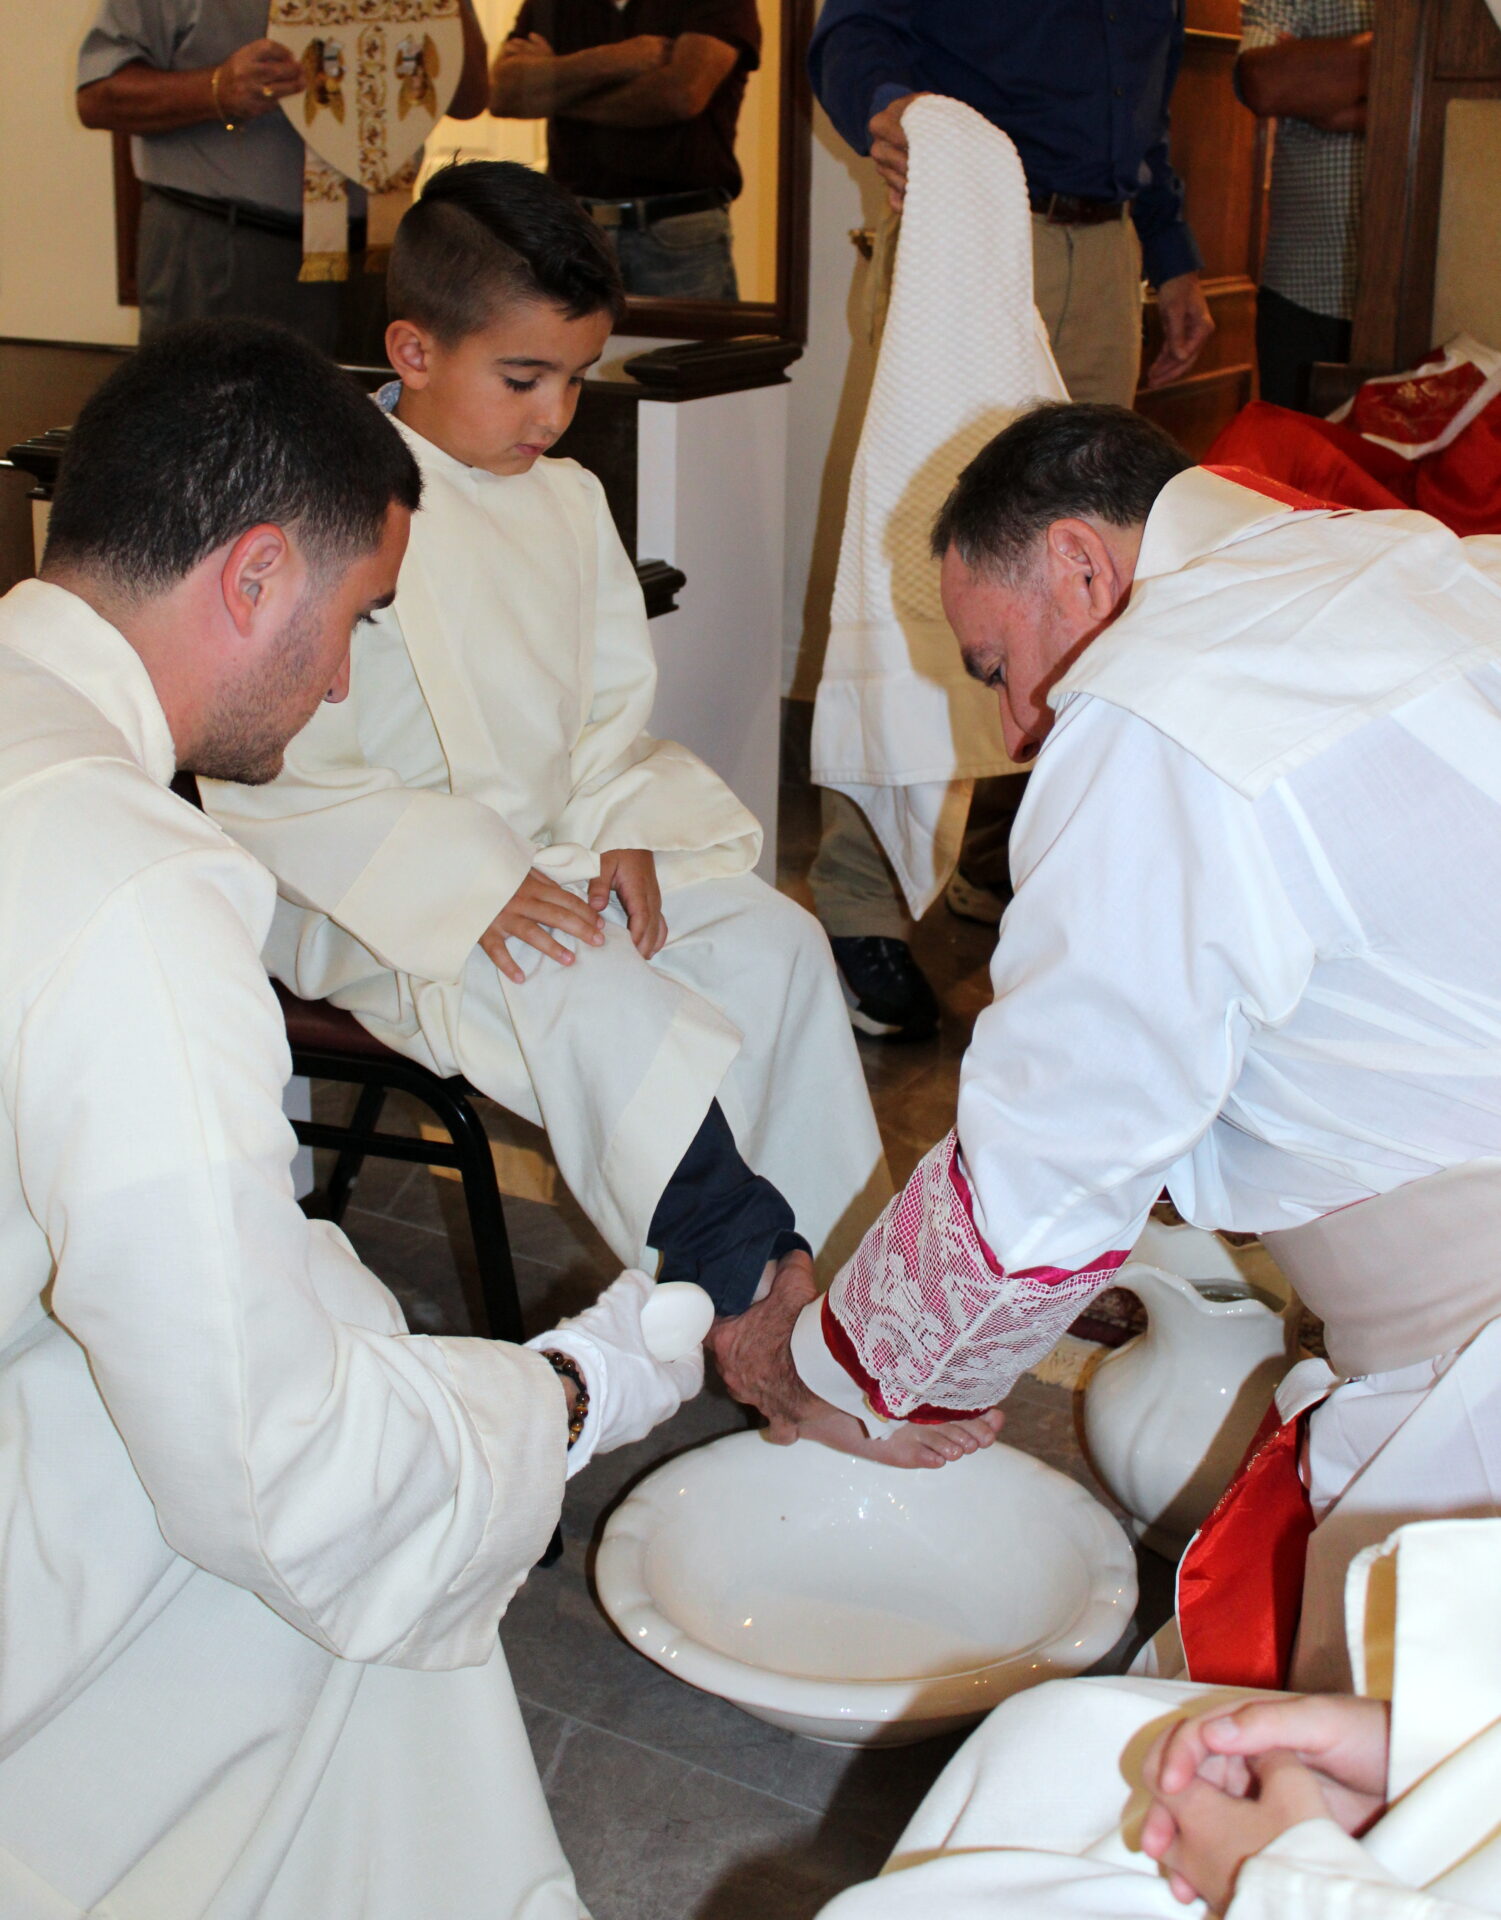 A priest washing a young sacristan’s feet